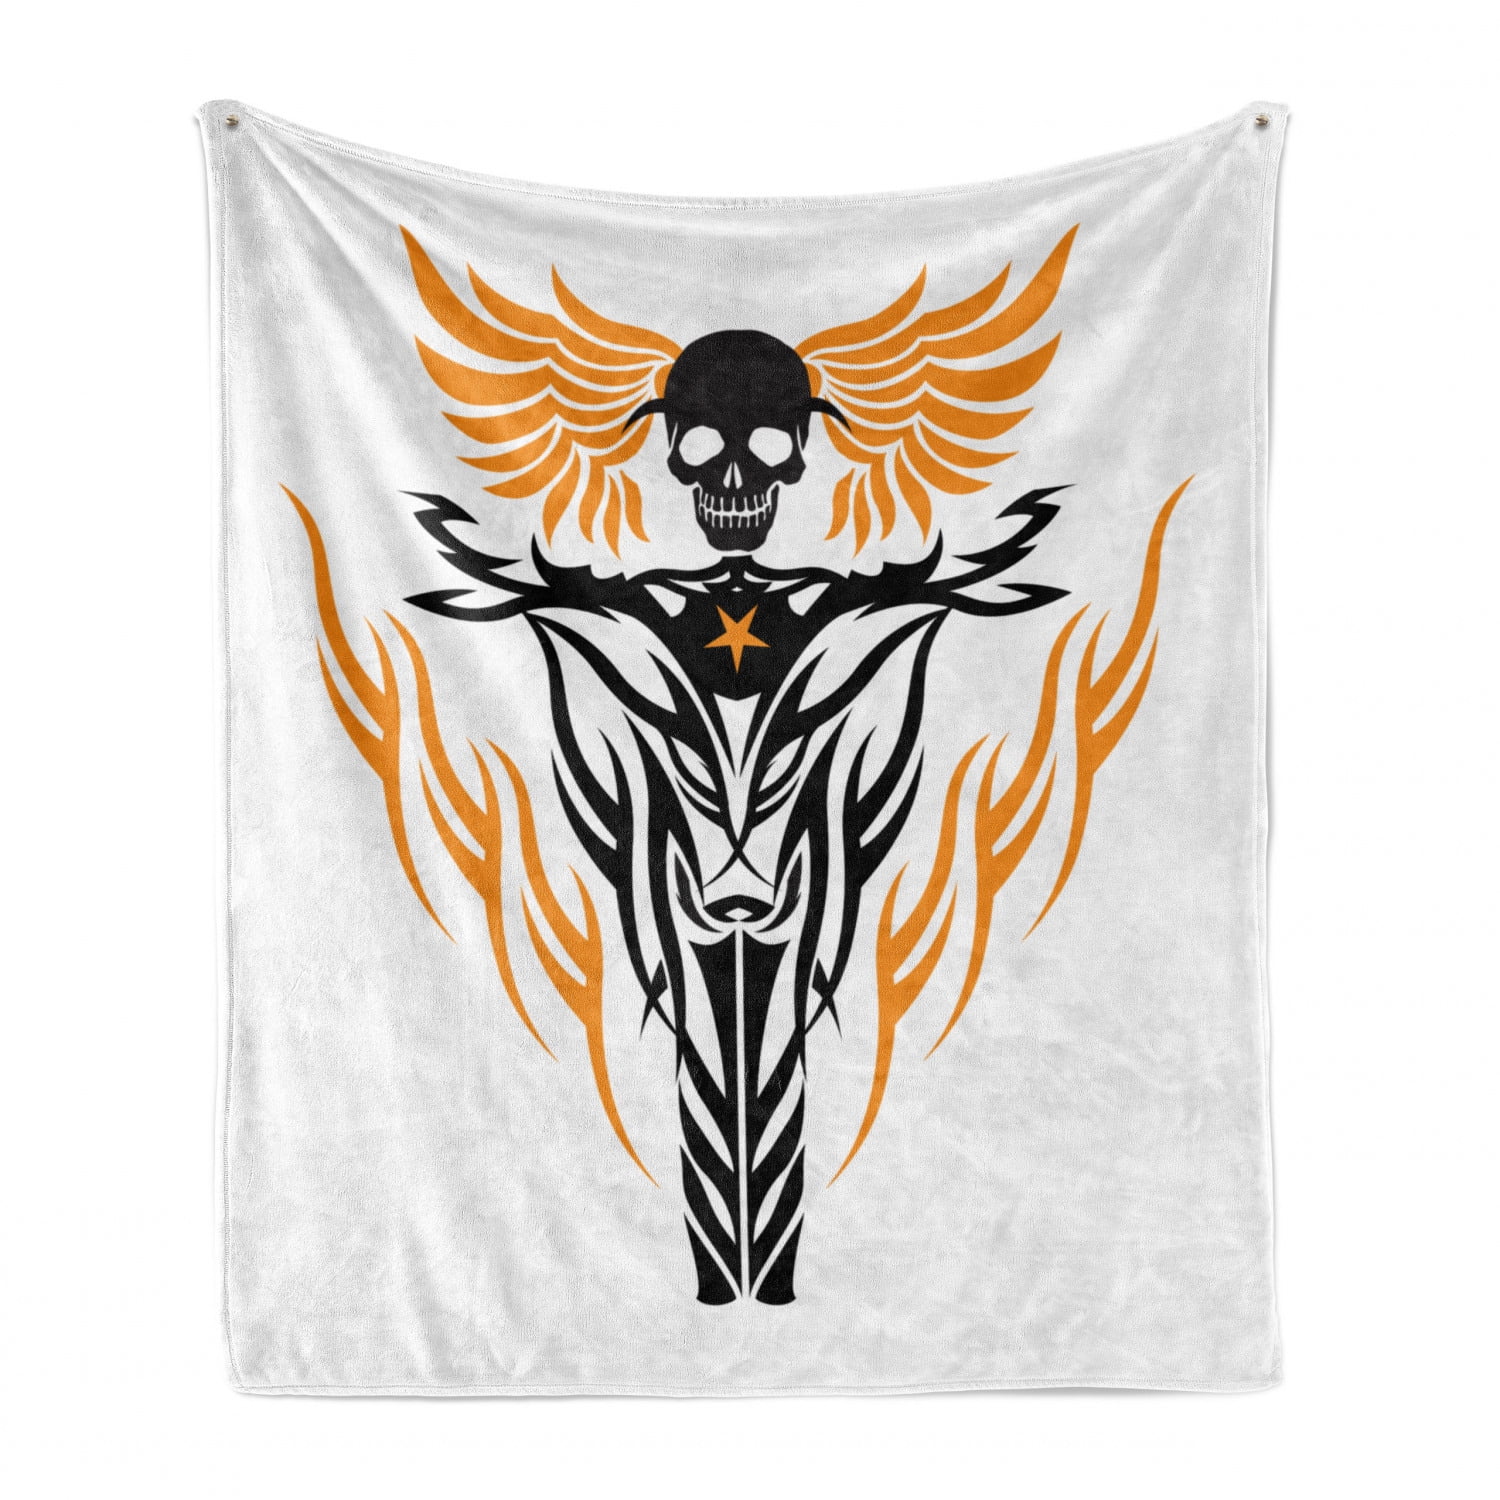 Orange and Charcoal Grey 50 x 60 Tribal Inspired Tattoo Design Flying Skull at Wheel Cool Vibes Ambesonne Motorcycle Soft Flannel Fleece Throw Blanket Cozy Plush for Indoor and Outdoor Use 